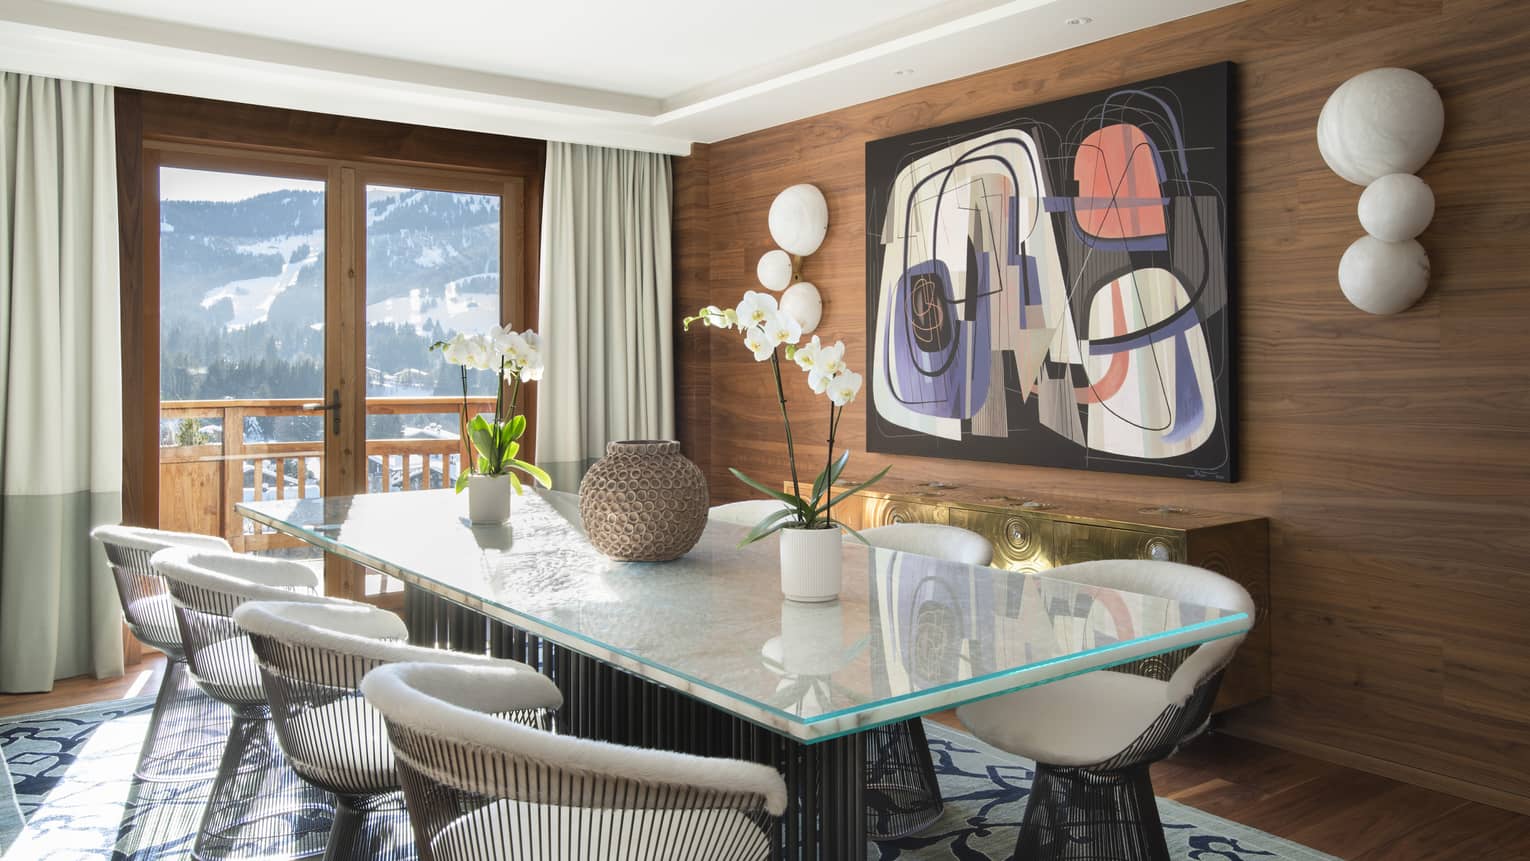 Wood-panelled dining room with modern art, rectangular glass table and round metal chairs, and mountain views